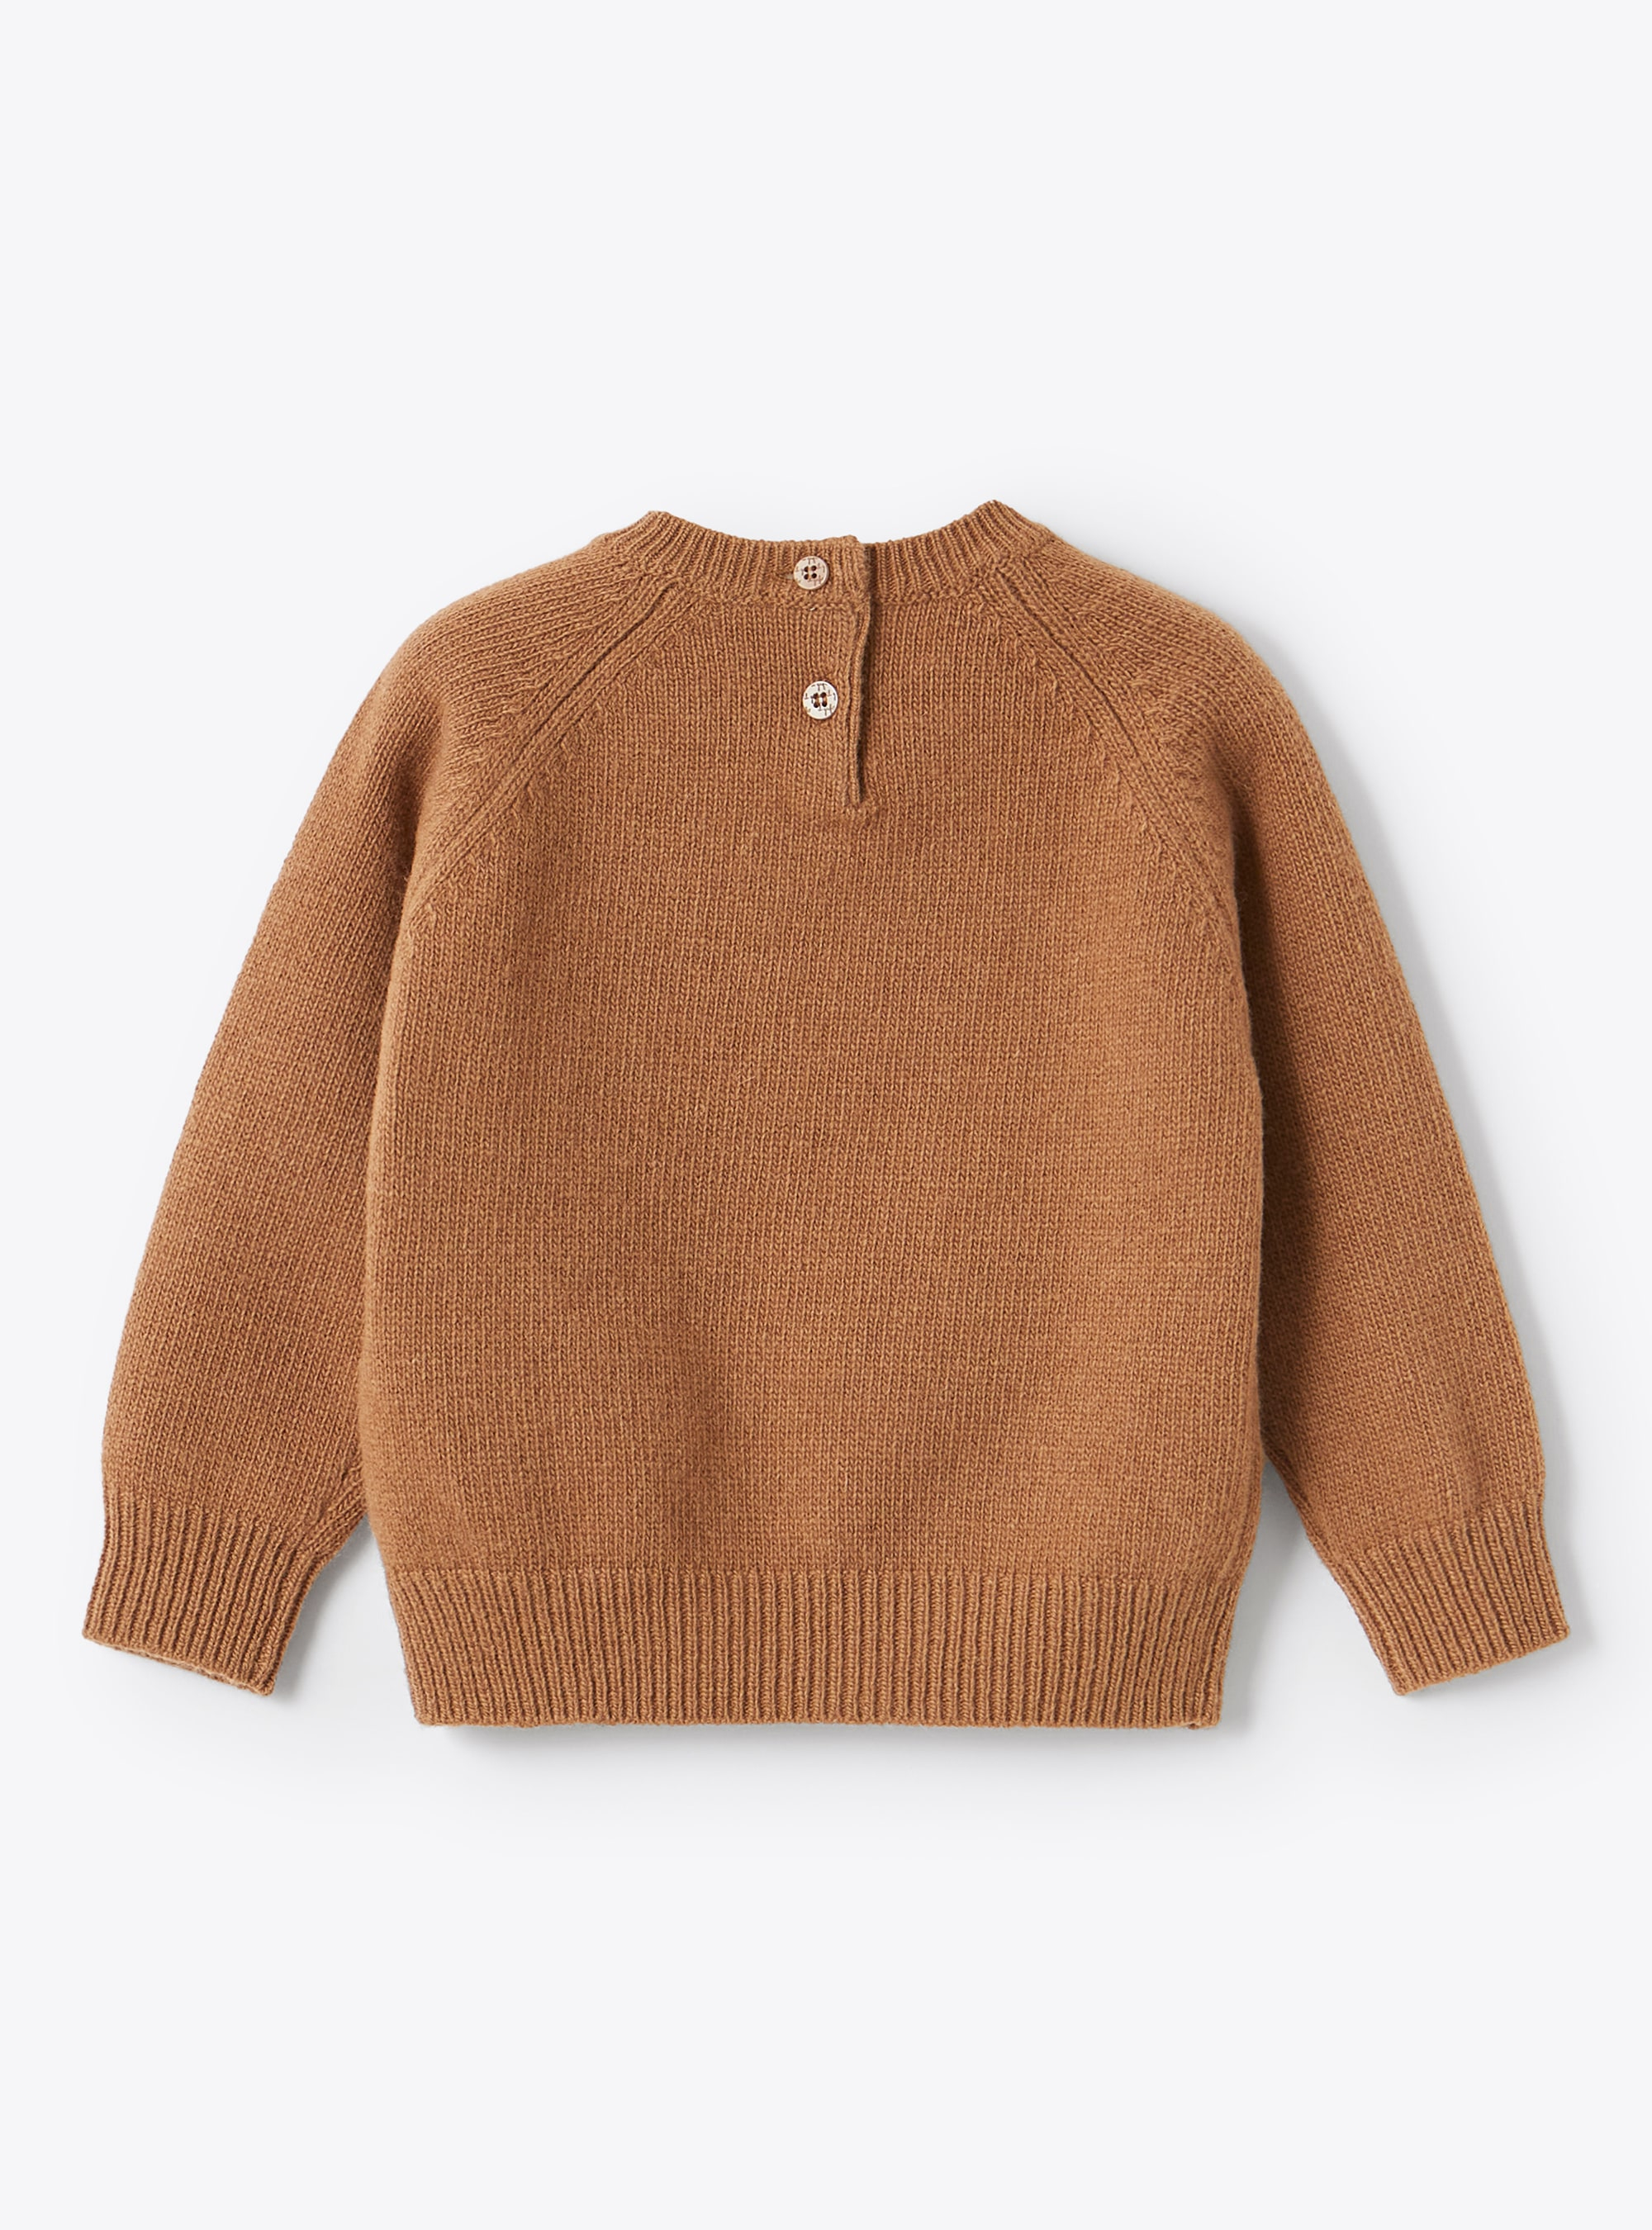 Brown wool sweater with teddy bear - Brown | Il Gufo